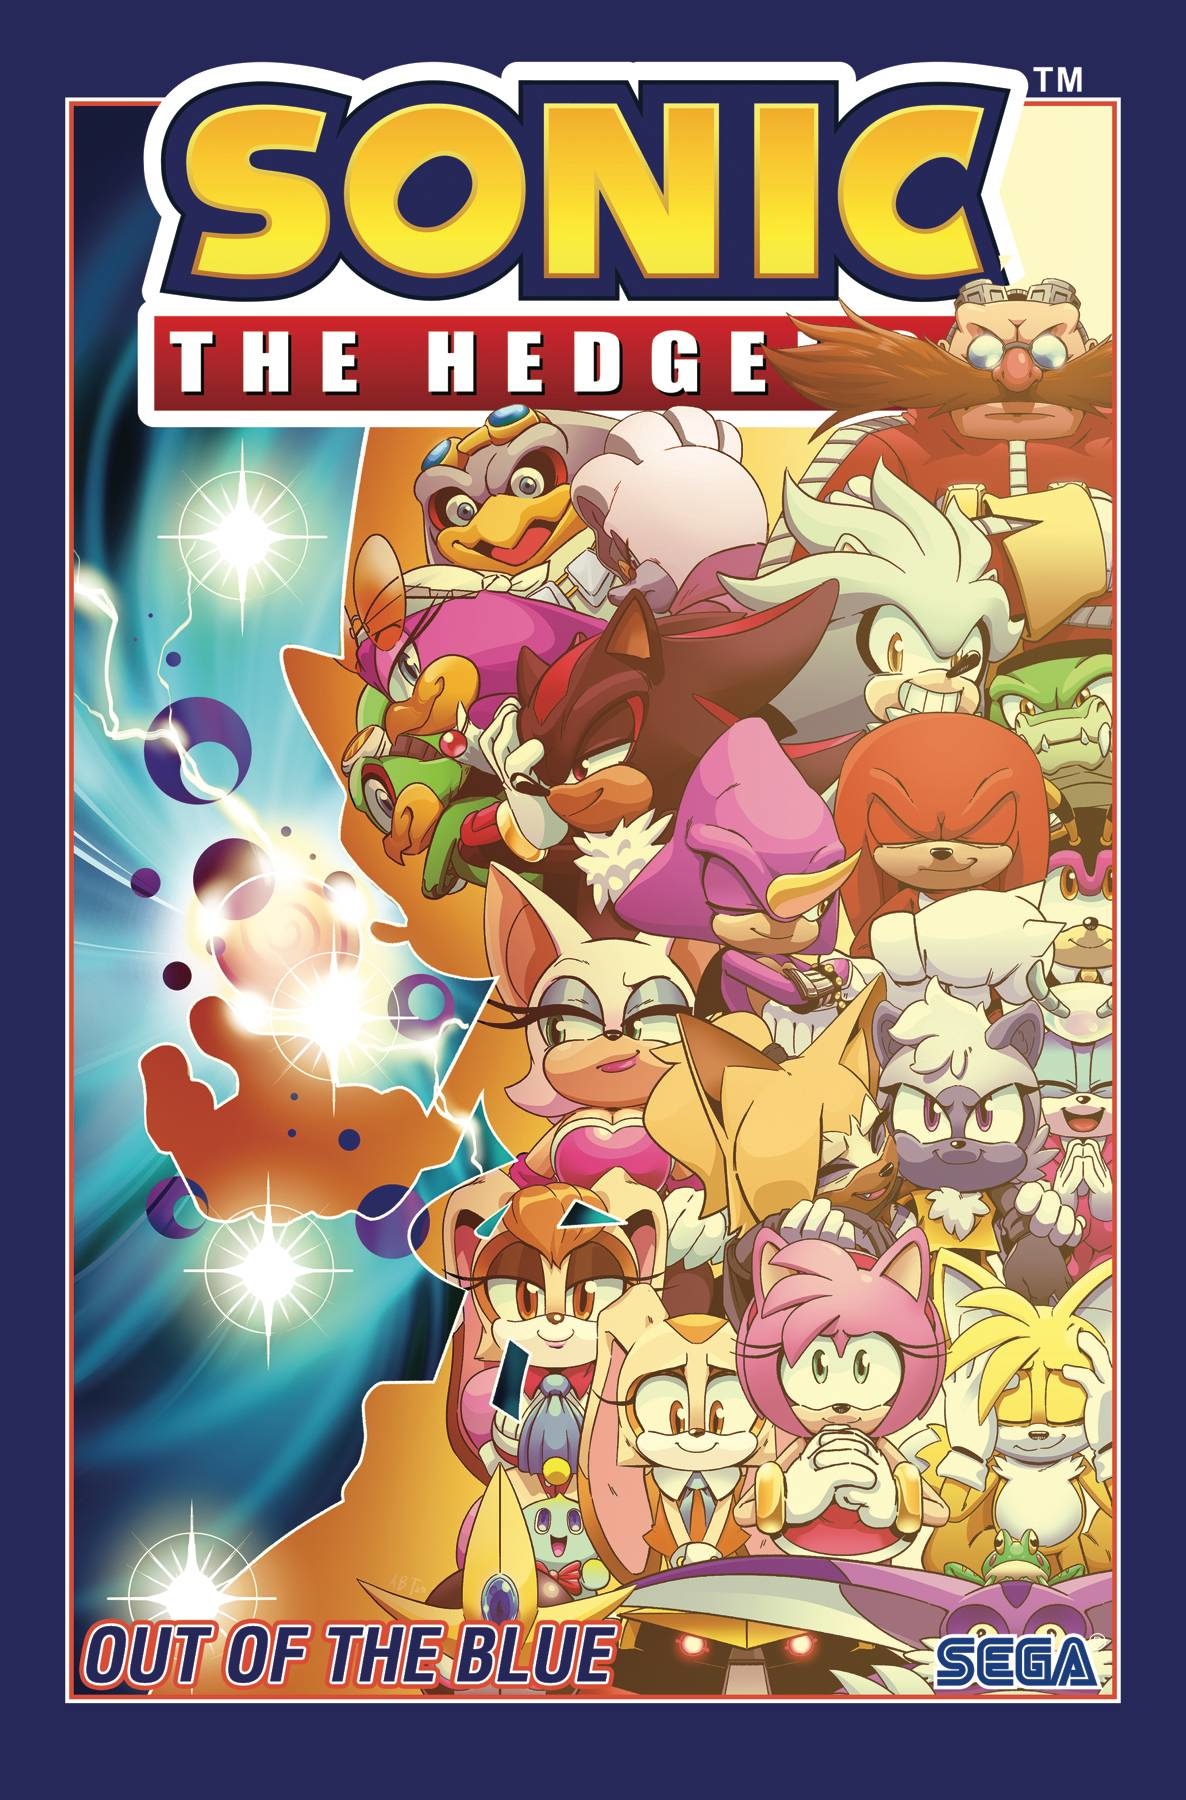 IDW Sonic The Hedgehog Vol 8 TP - Out Of The Blue